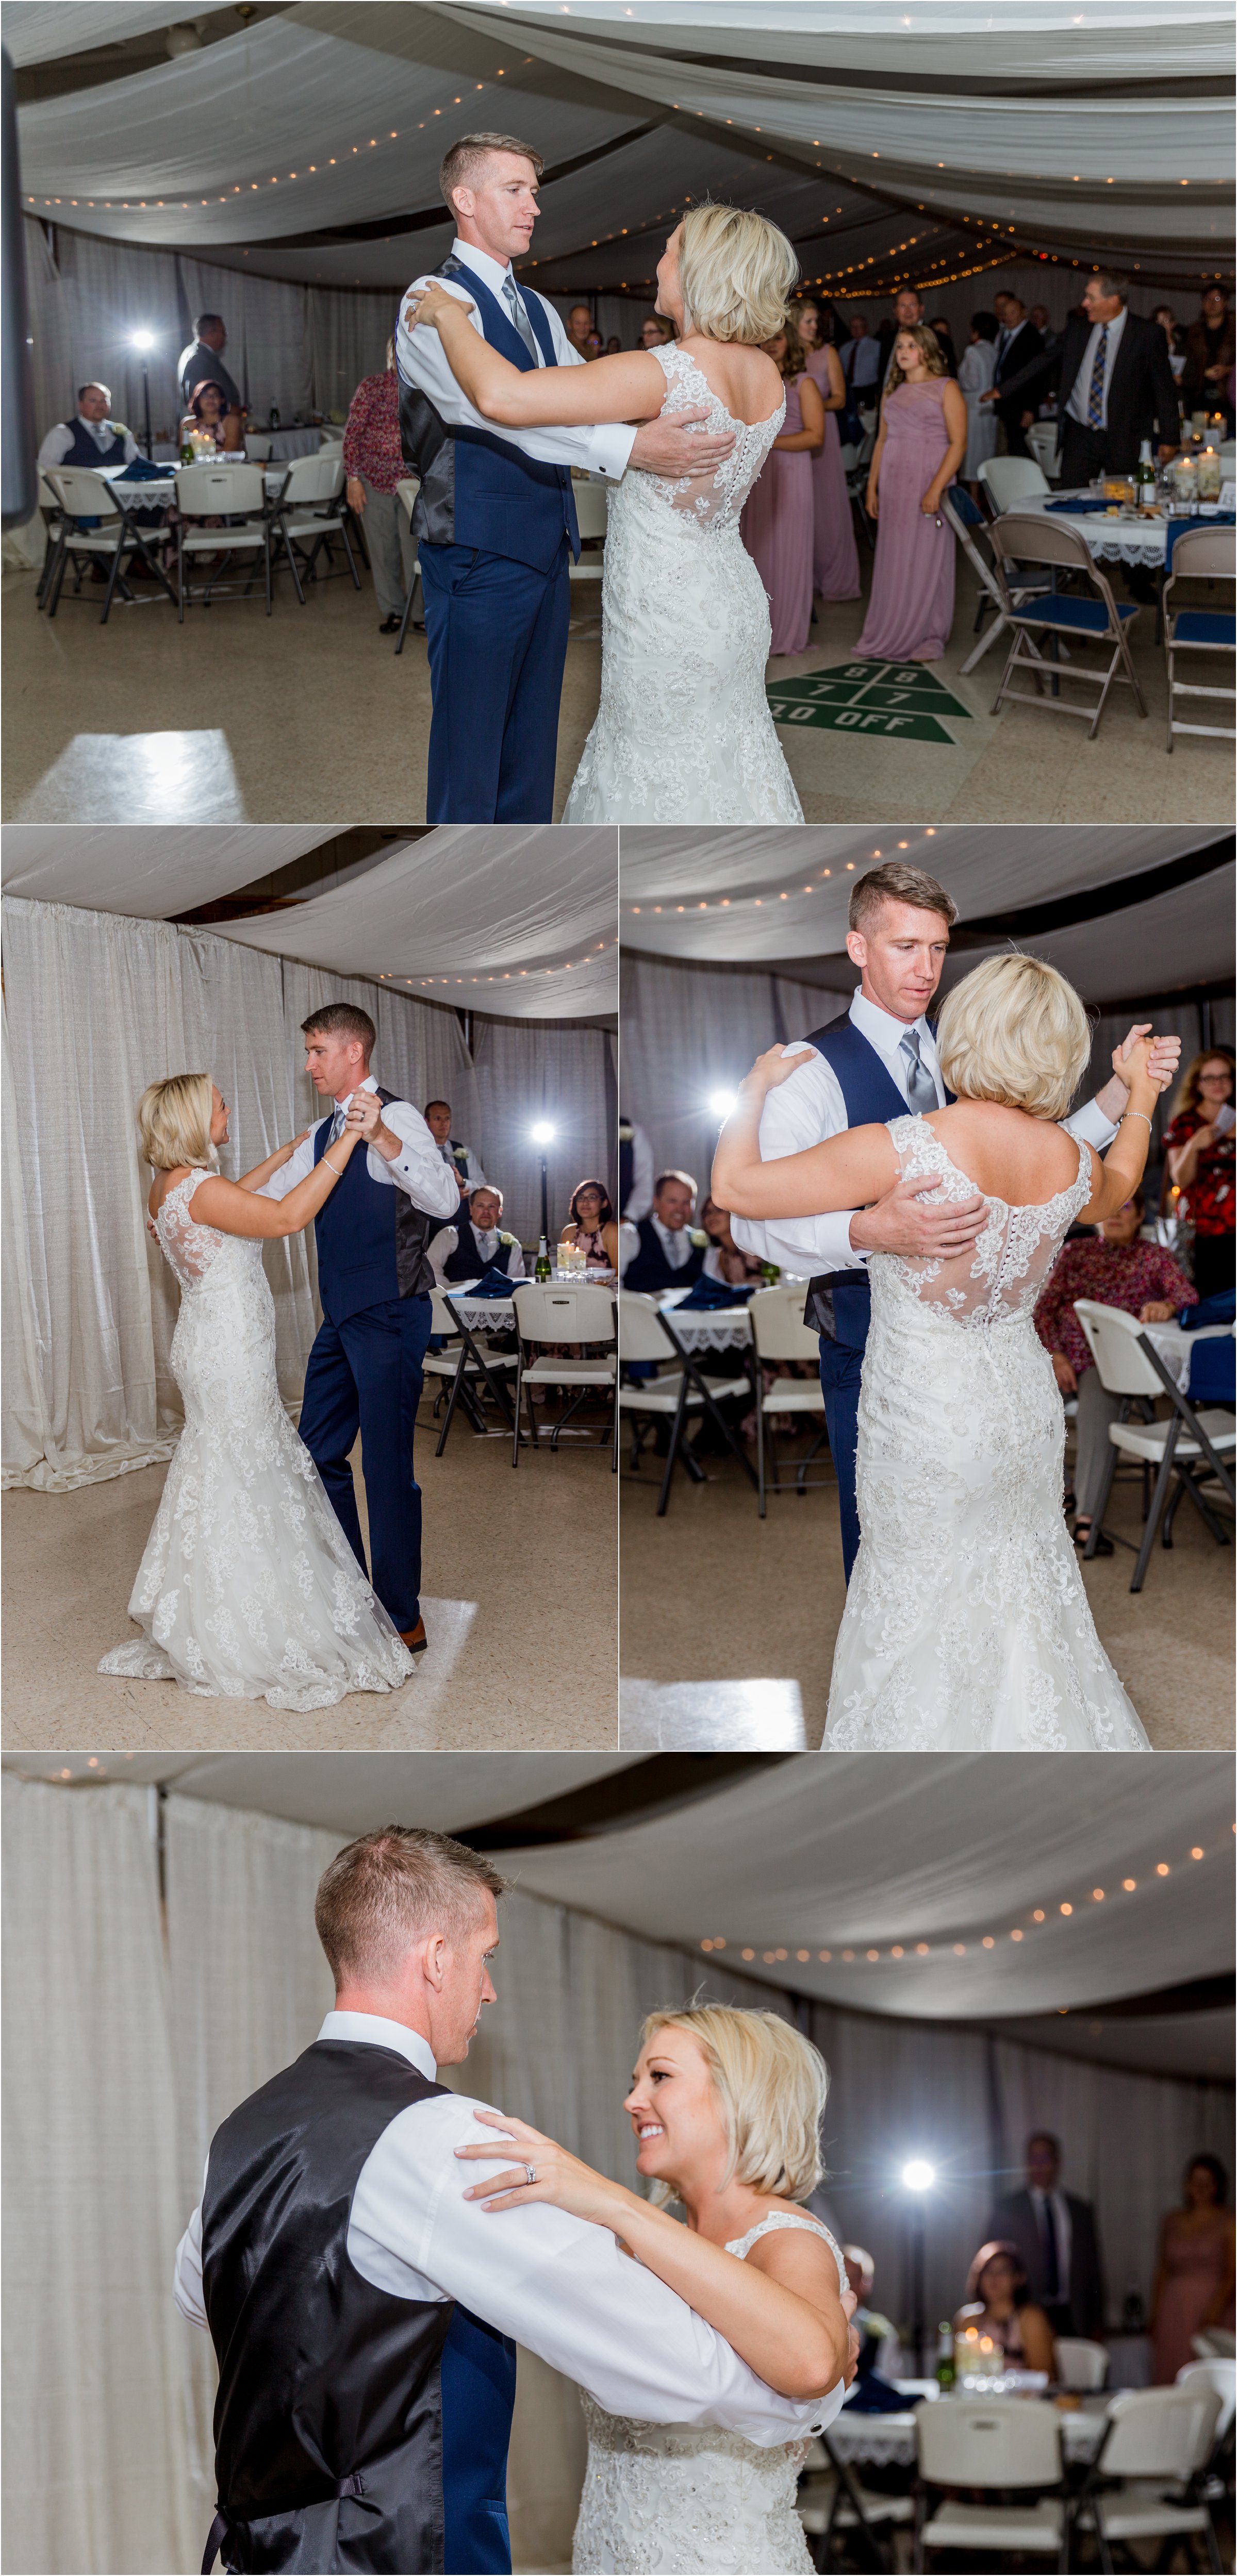 bride and groom dance their first dance together at their cheyenne wedding reception